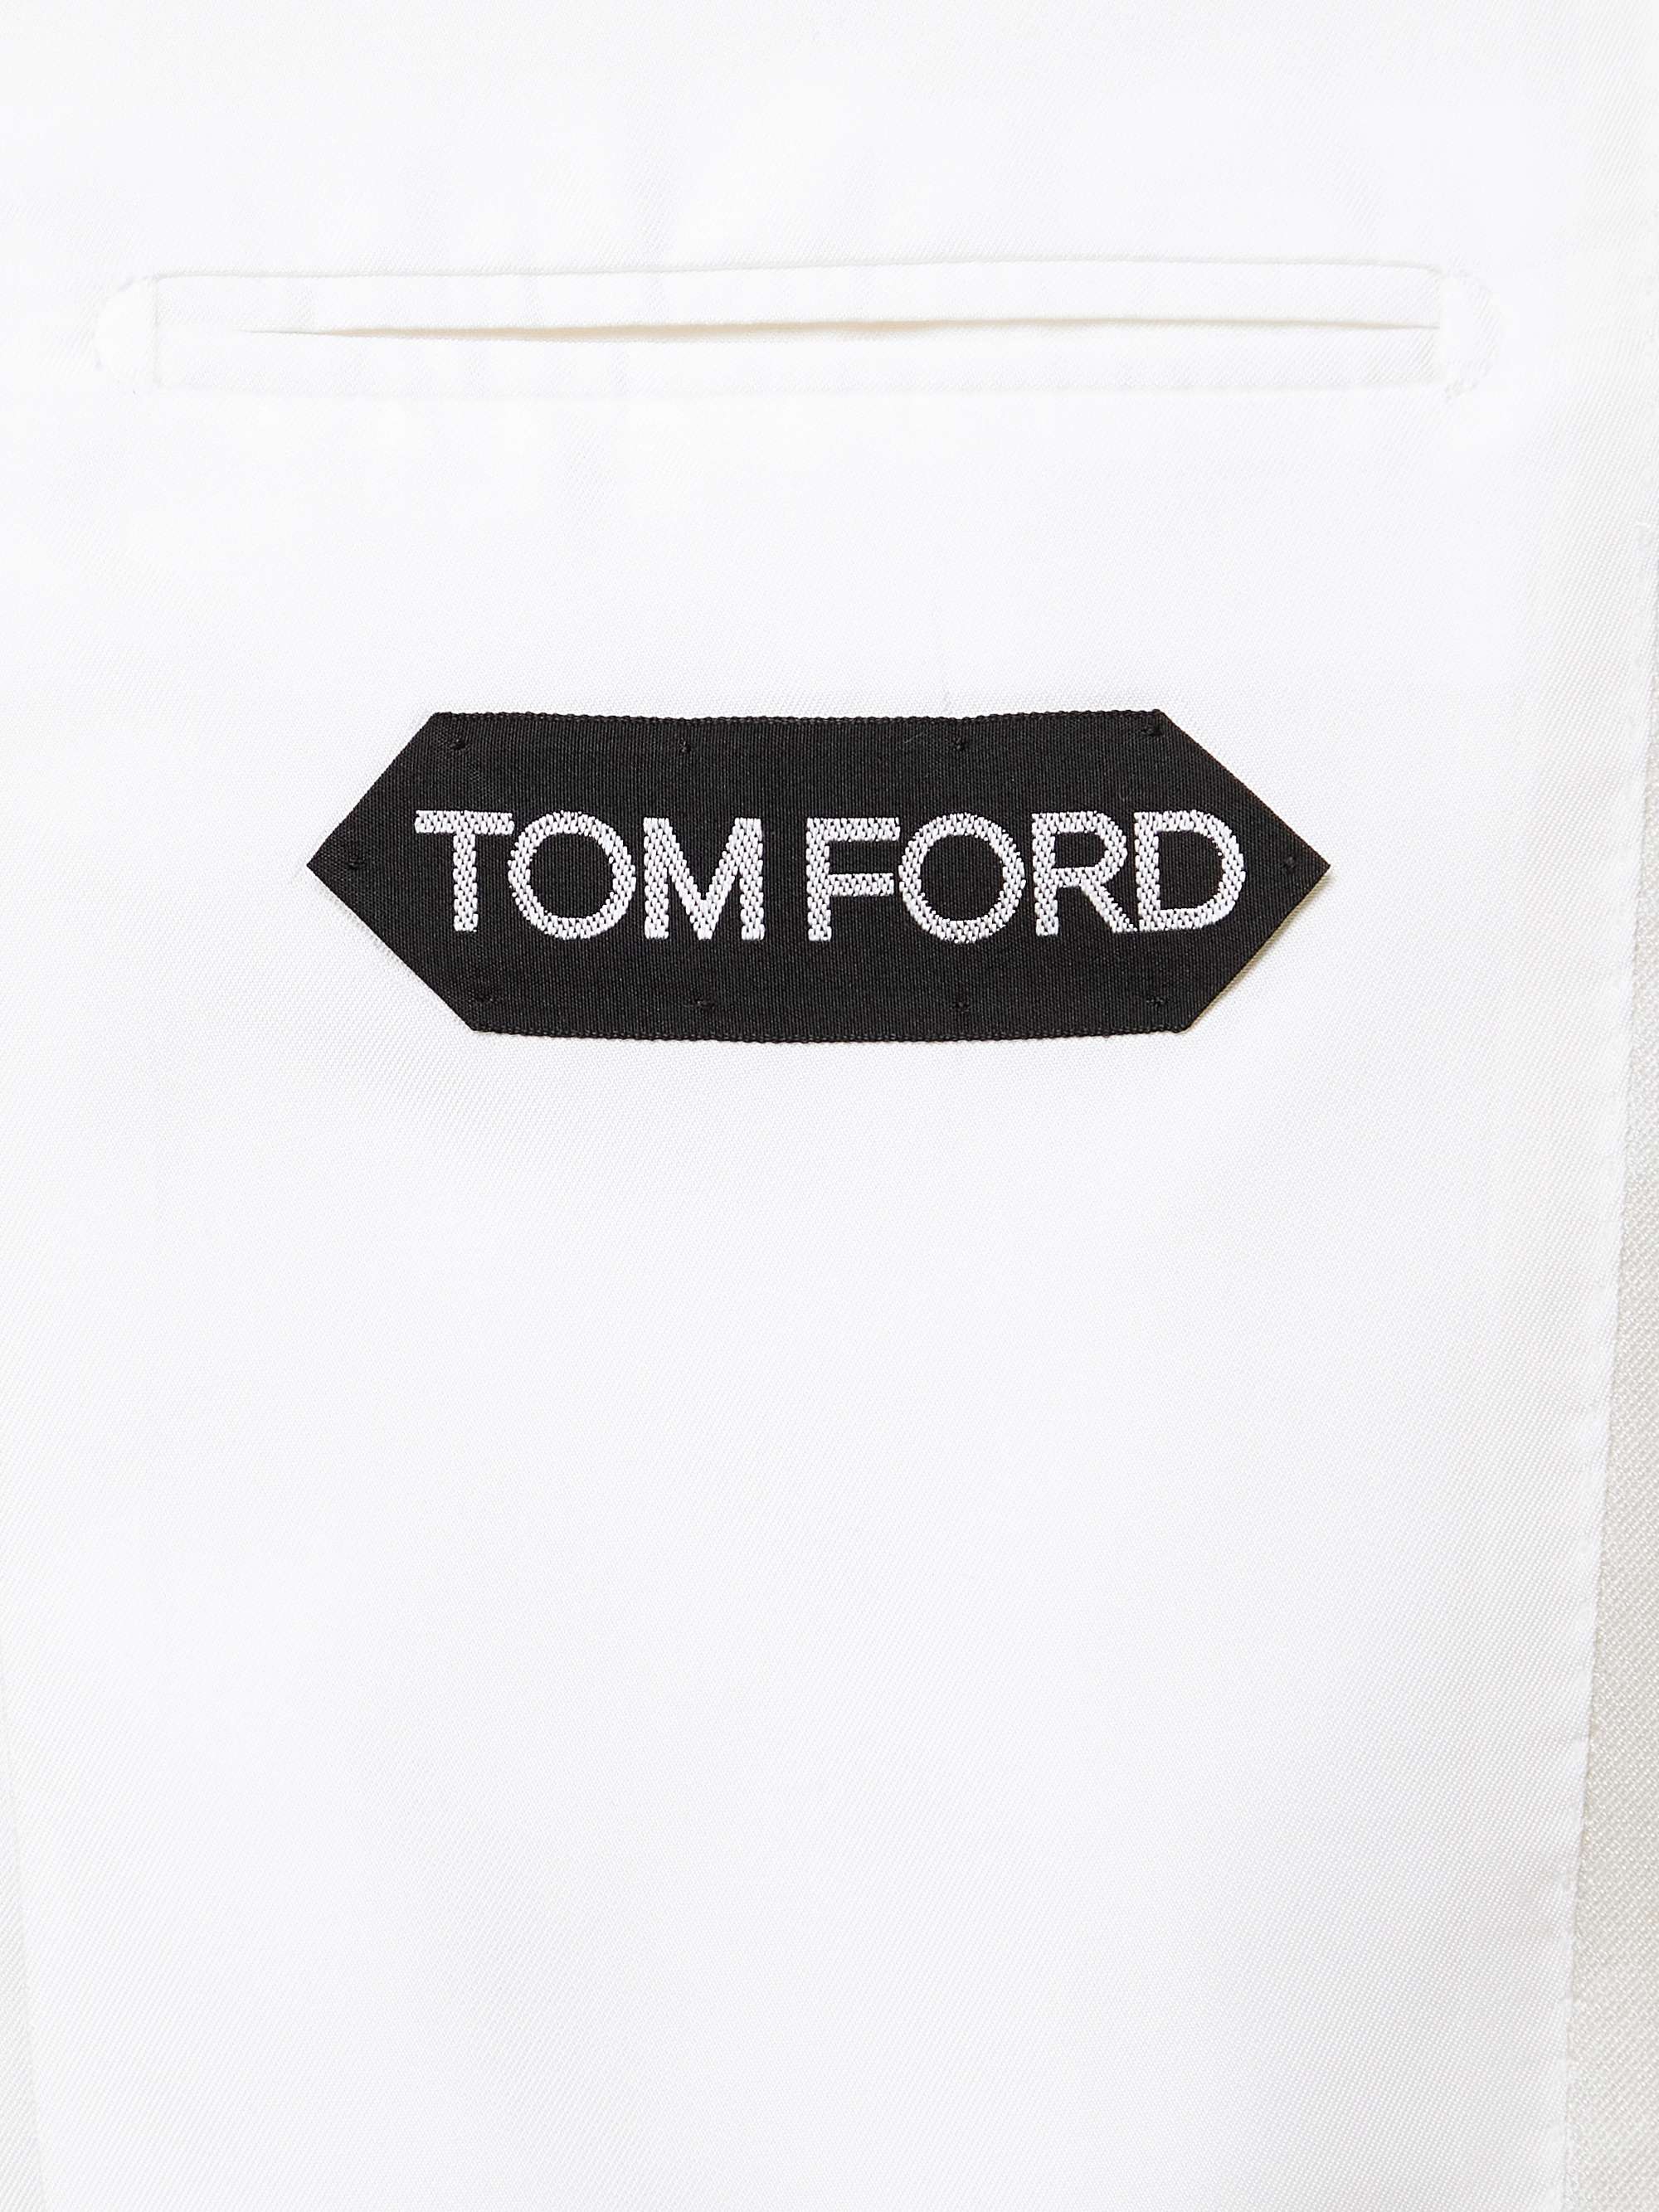 TOM FORD O'Connor Slim-Fit Satin-Trimmed Wool and Mohair-Blend Tuxedo Jacket